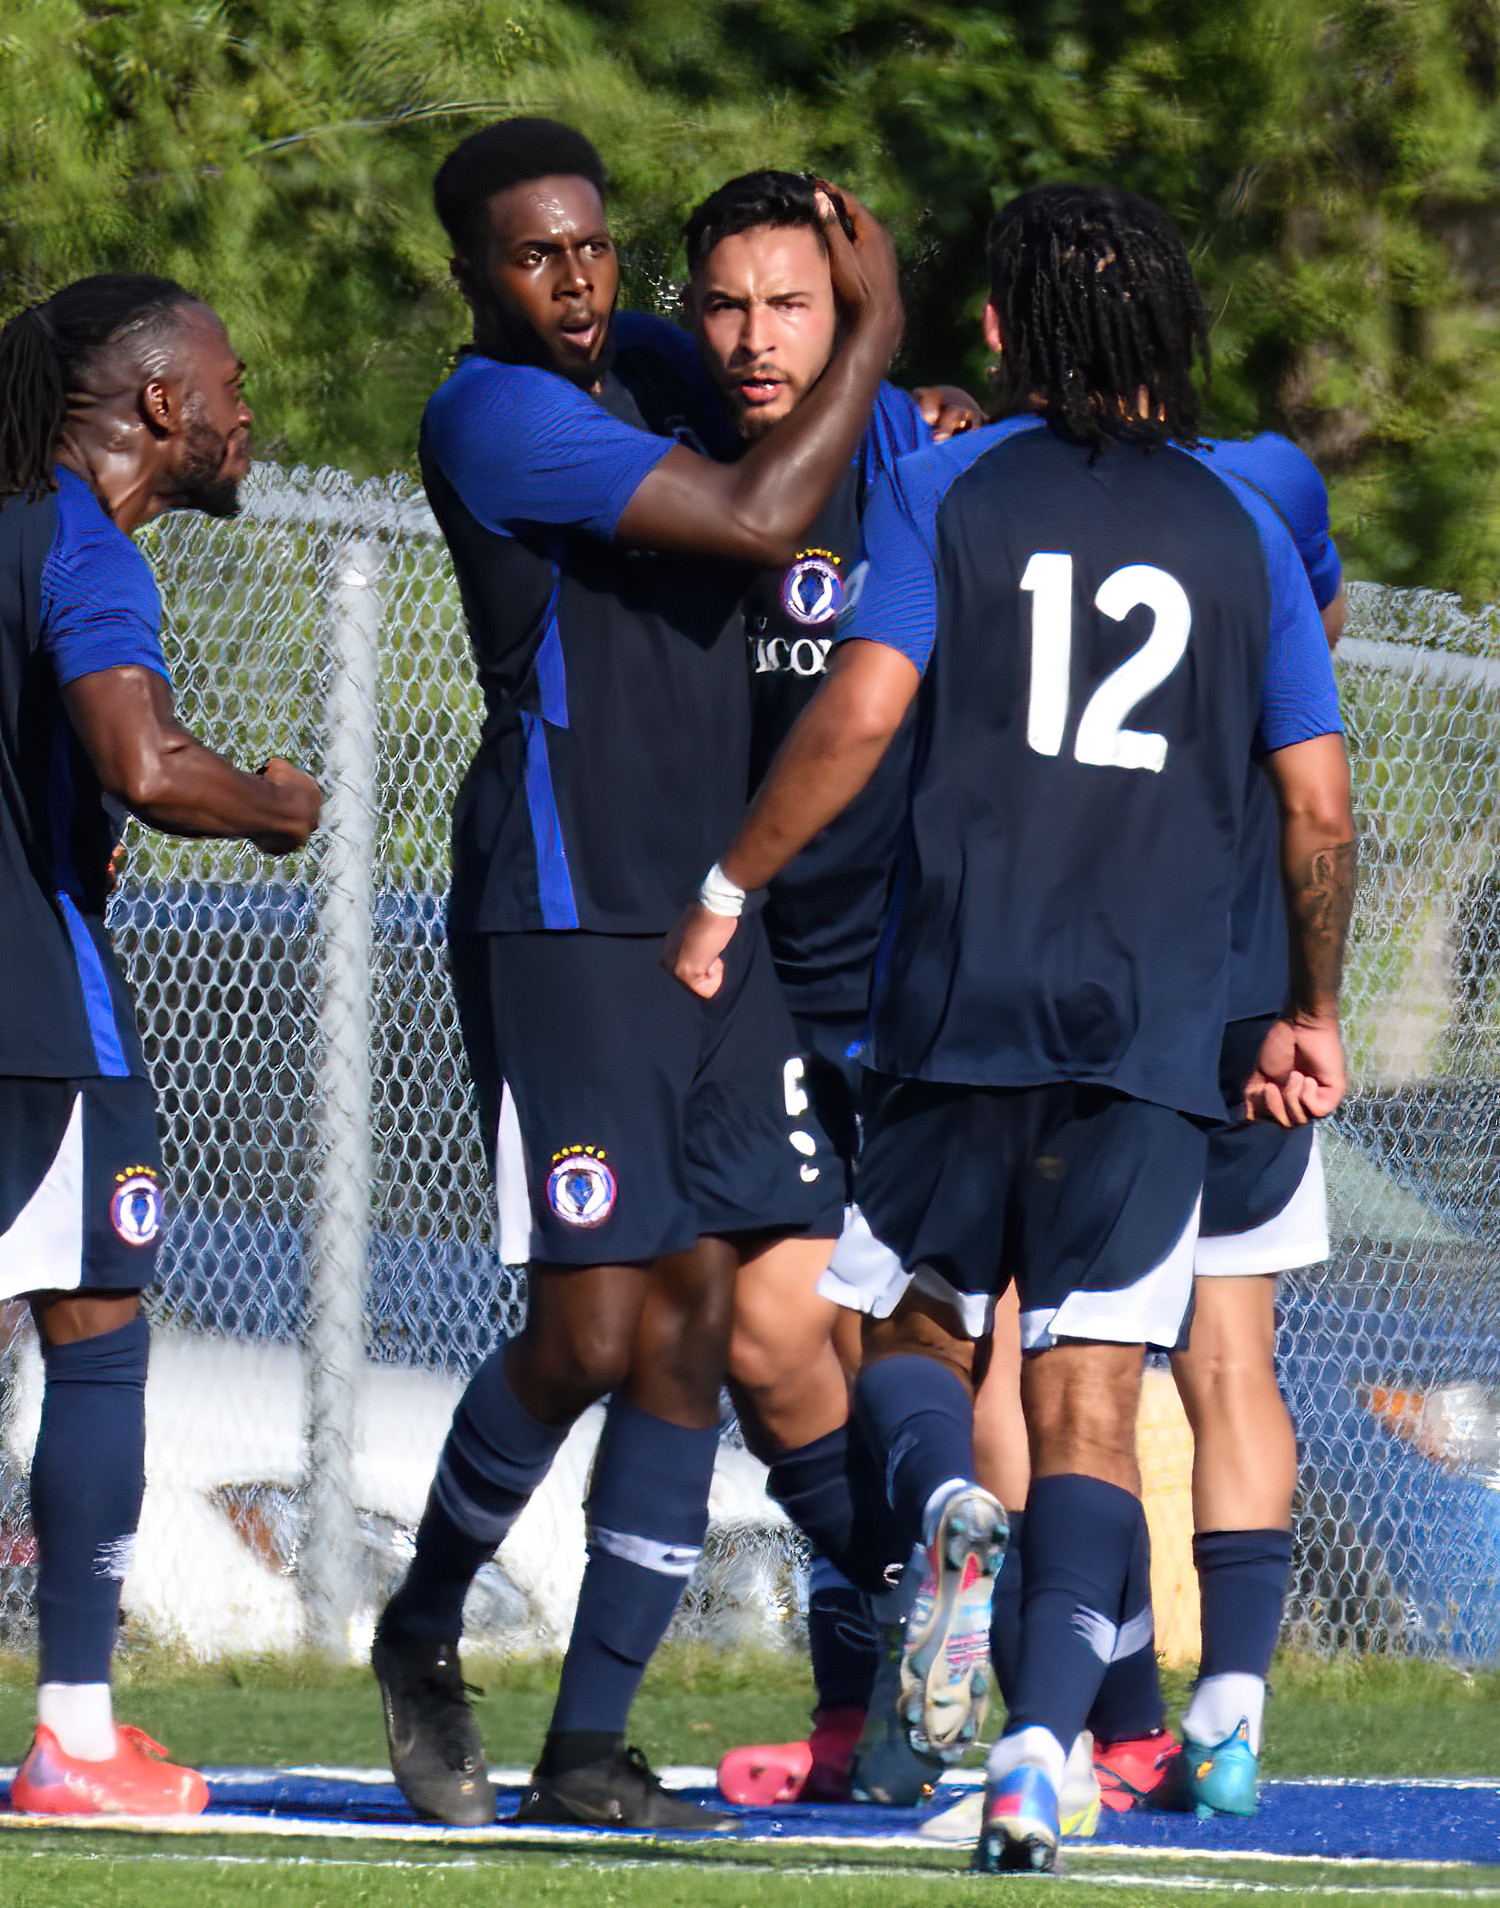 Taha Ilyass, the centre of attention | Taha is virtually unstoppable, last week while draped by two defenders thought the match, he still managed to score the game winner as Blue Devils FC defeated Alliance United in the Semi-Finals. | Bob Twidle